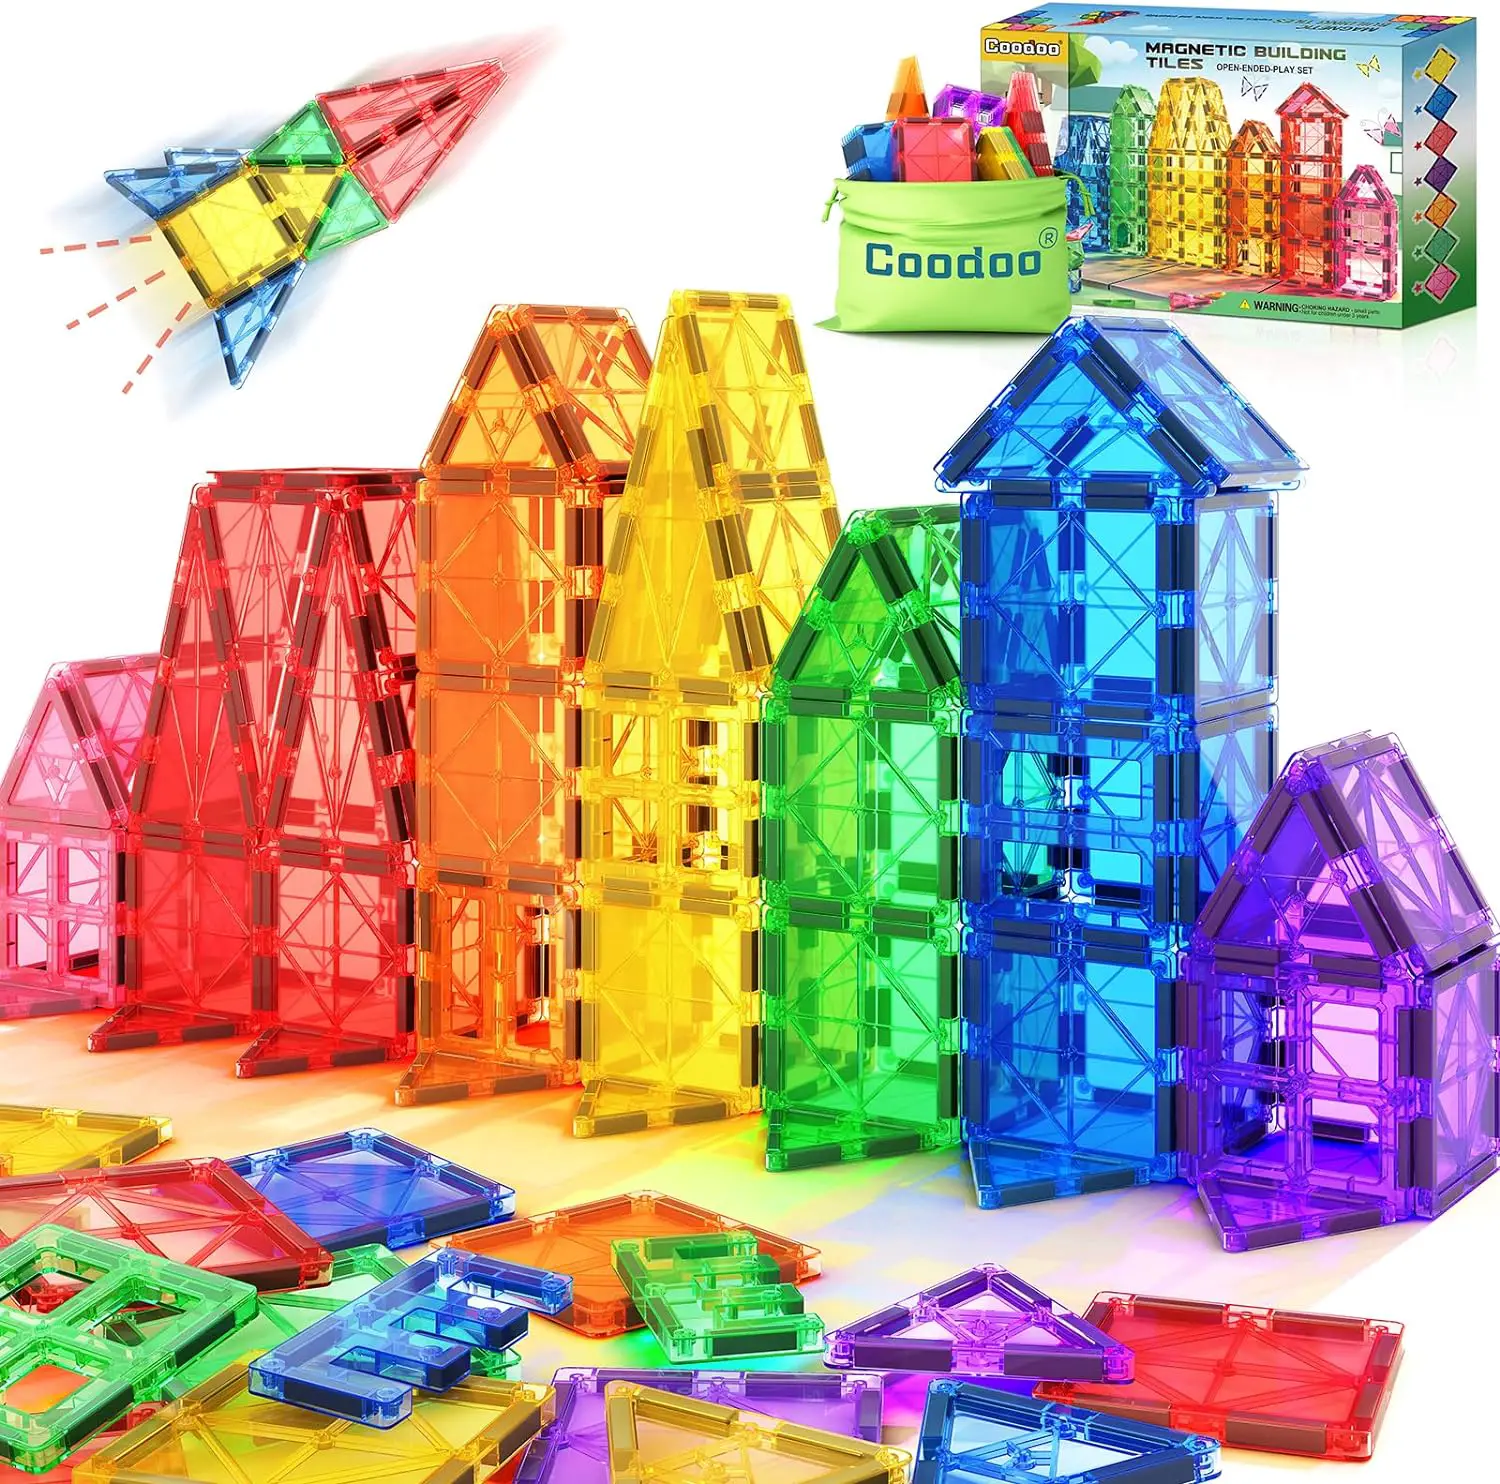 Kids Toys Magnetic Tiles Starter Set, Magnetic Blocks for Toddlers Magnet Building Toys Preschool Montessori Learning Games for 3+ Year Old Boys  Girls, Creative Classroom Supplies